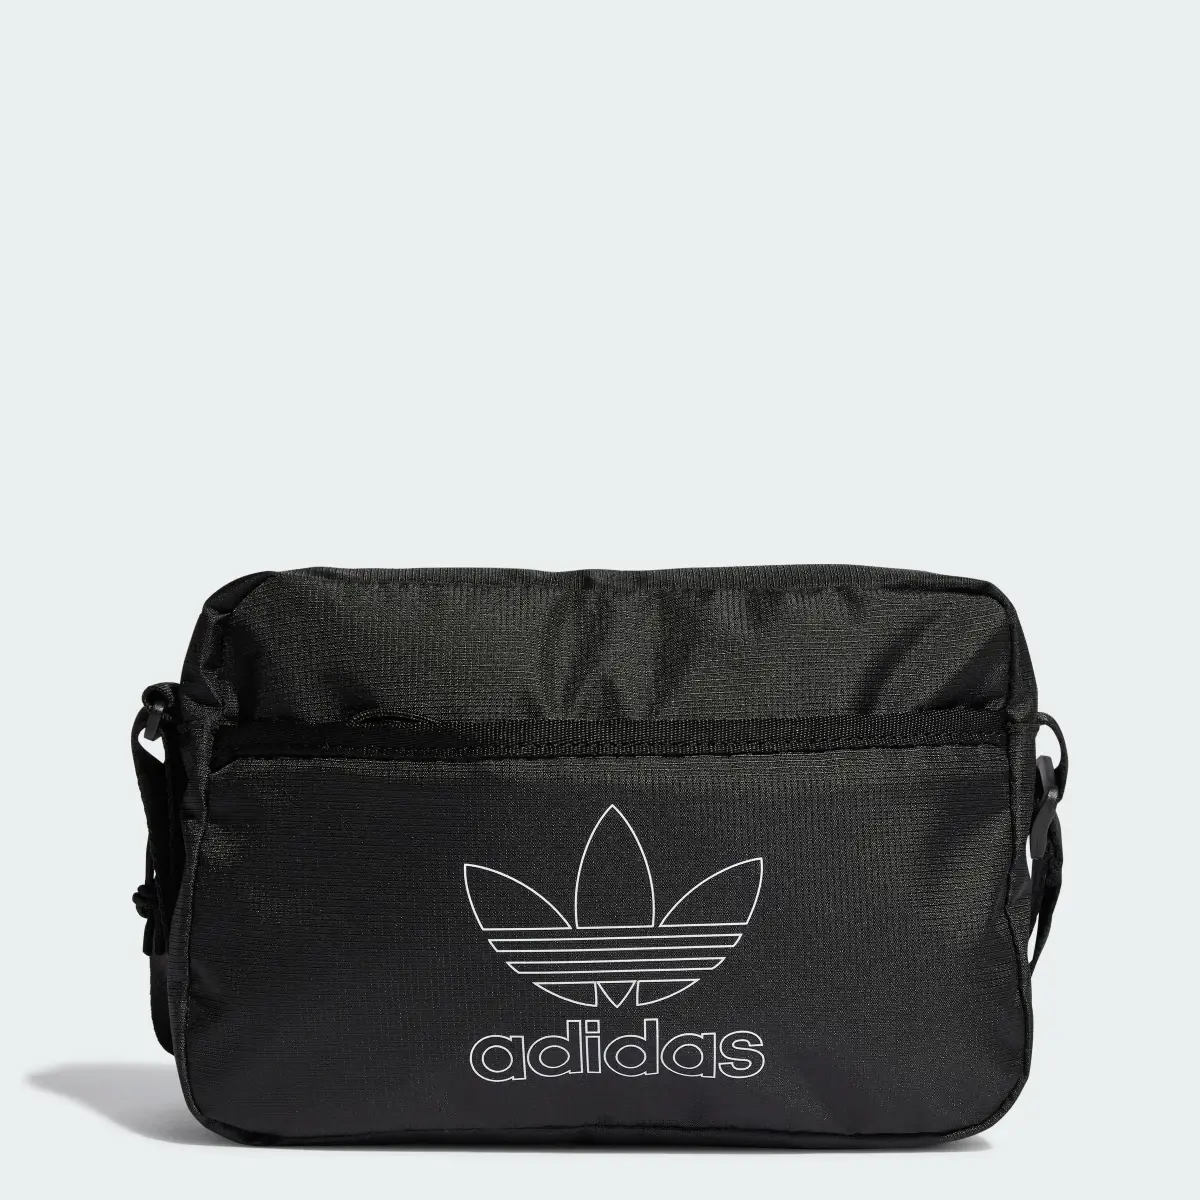 Adidas Bolso Small Airliner. 1